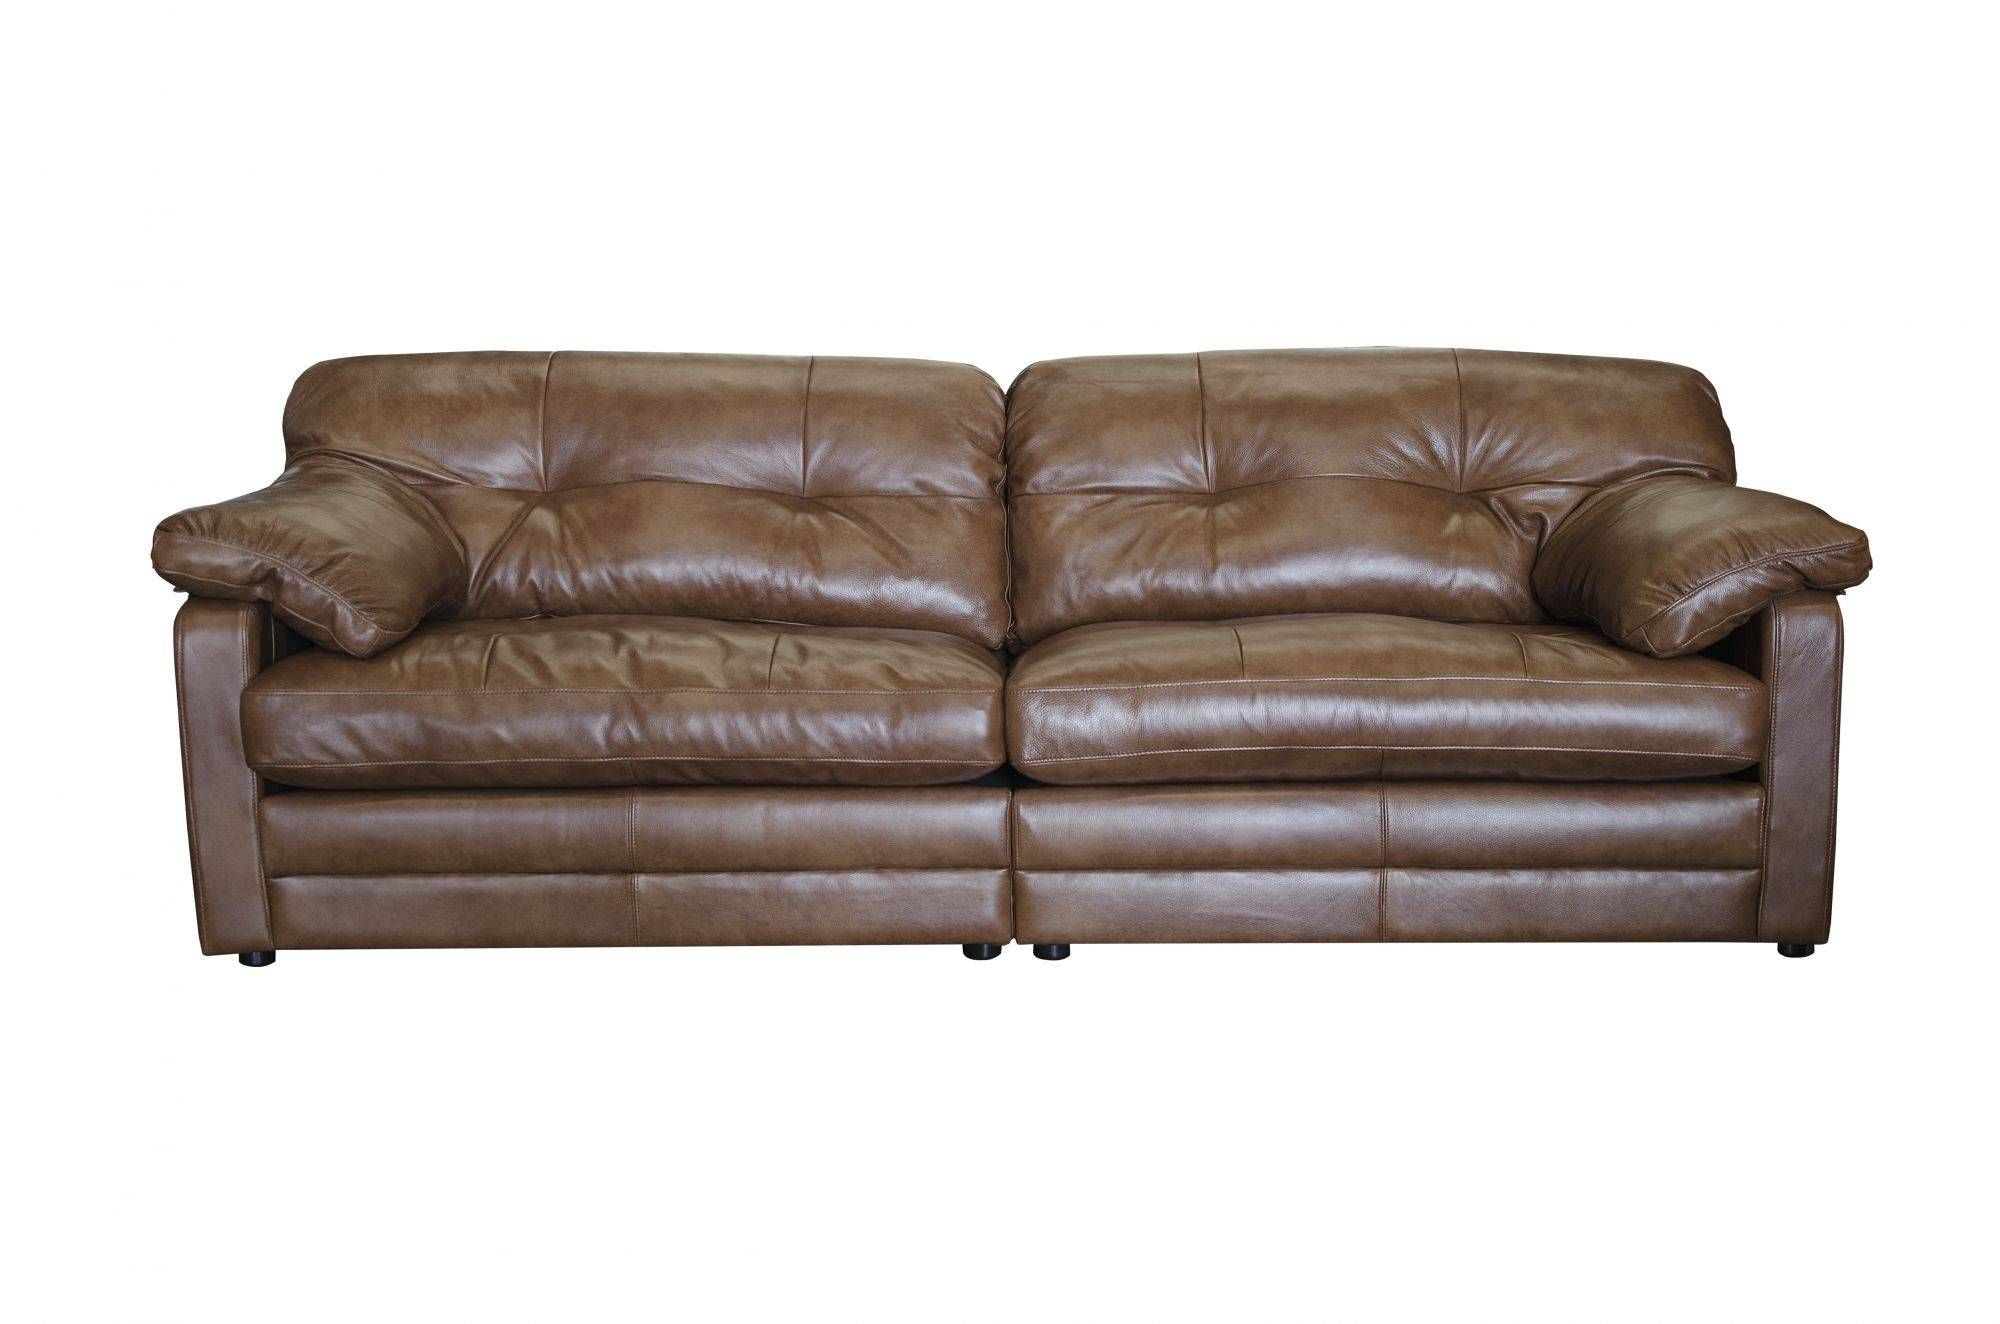 4 Seater Sofas – Choose Your 4 Seater Online At Aldiss With 4 Seater Sofas (View 16 of 30)